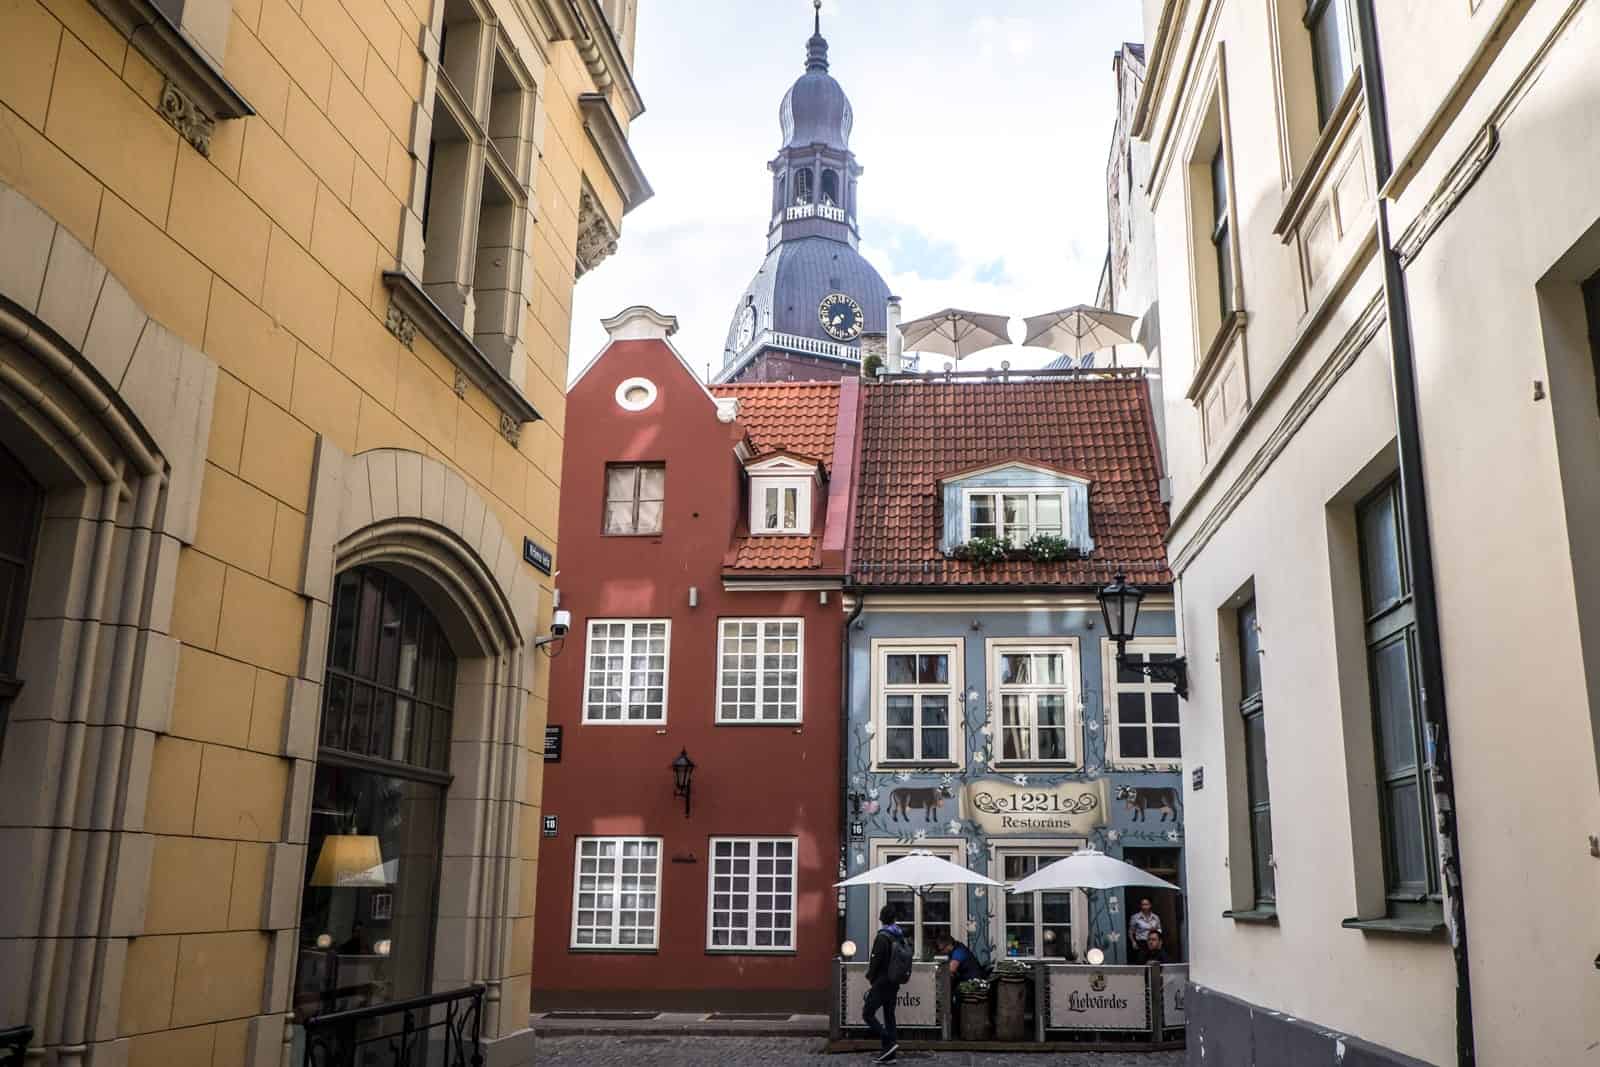 Riga Old Town architecture as seen from a narrow side street